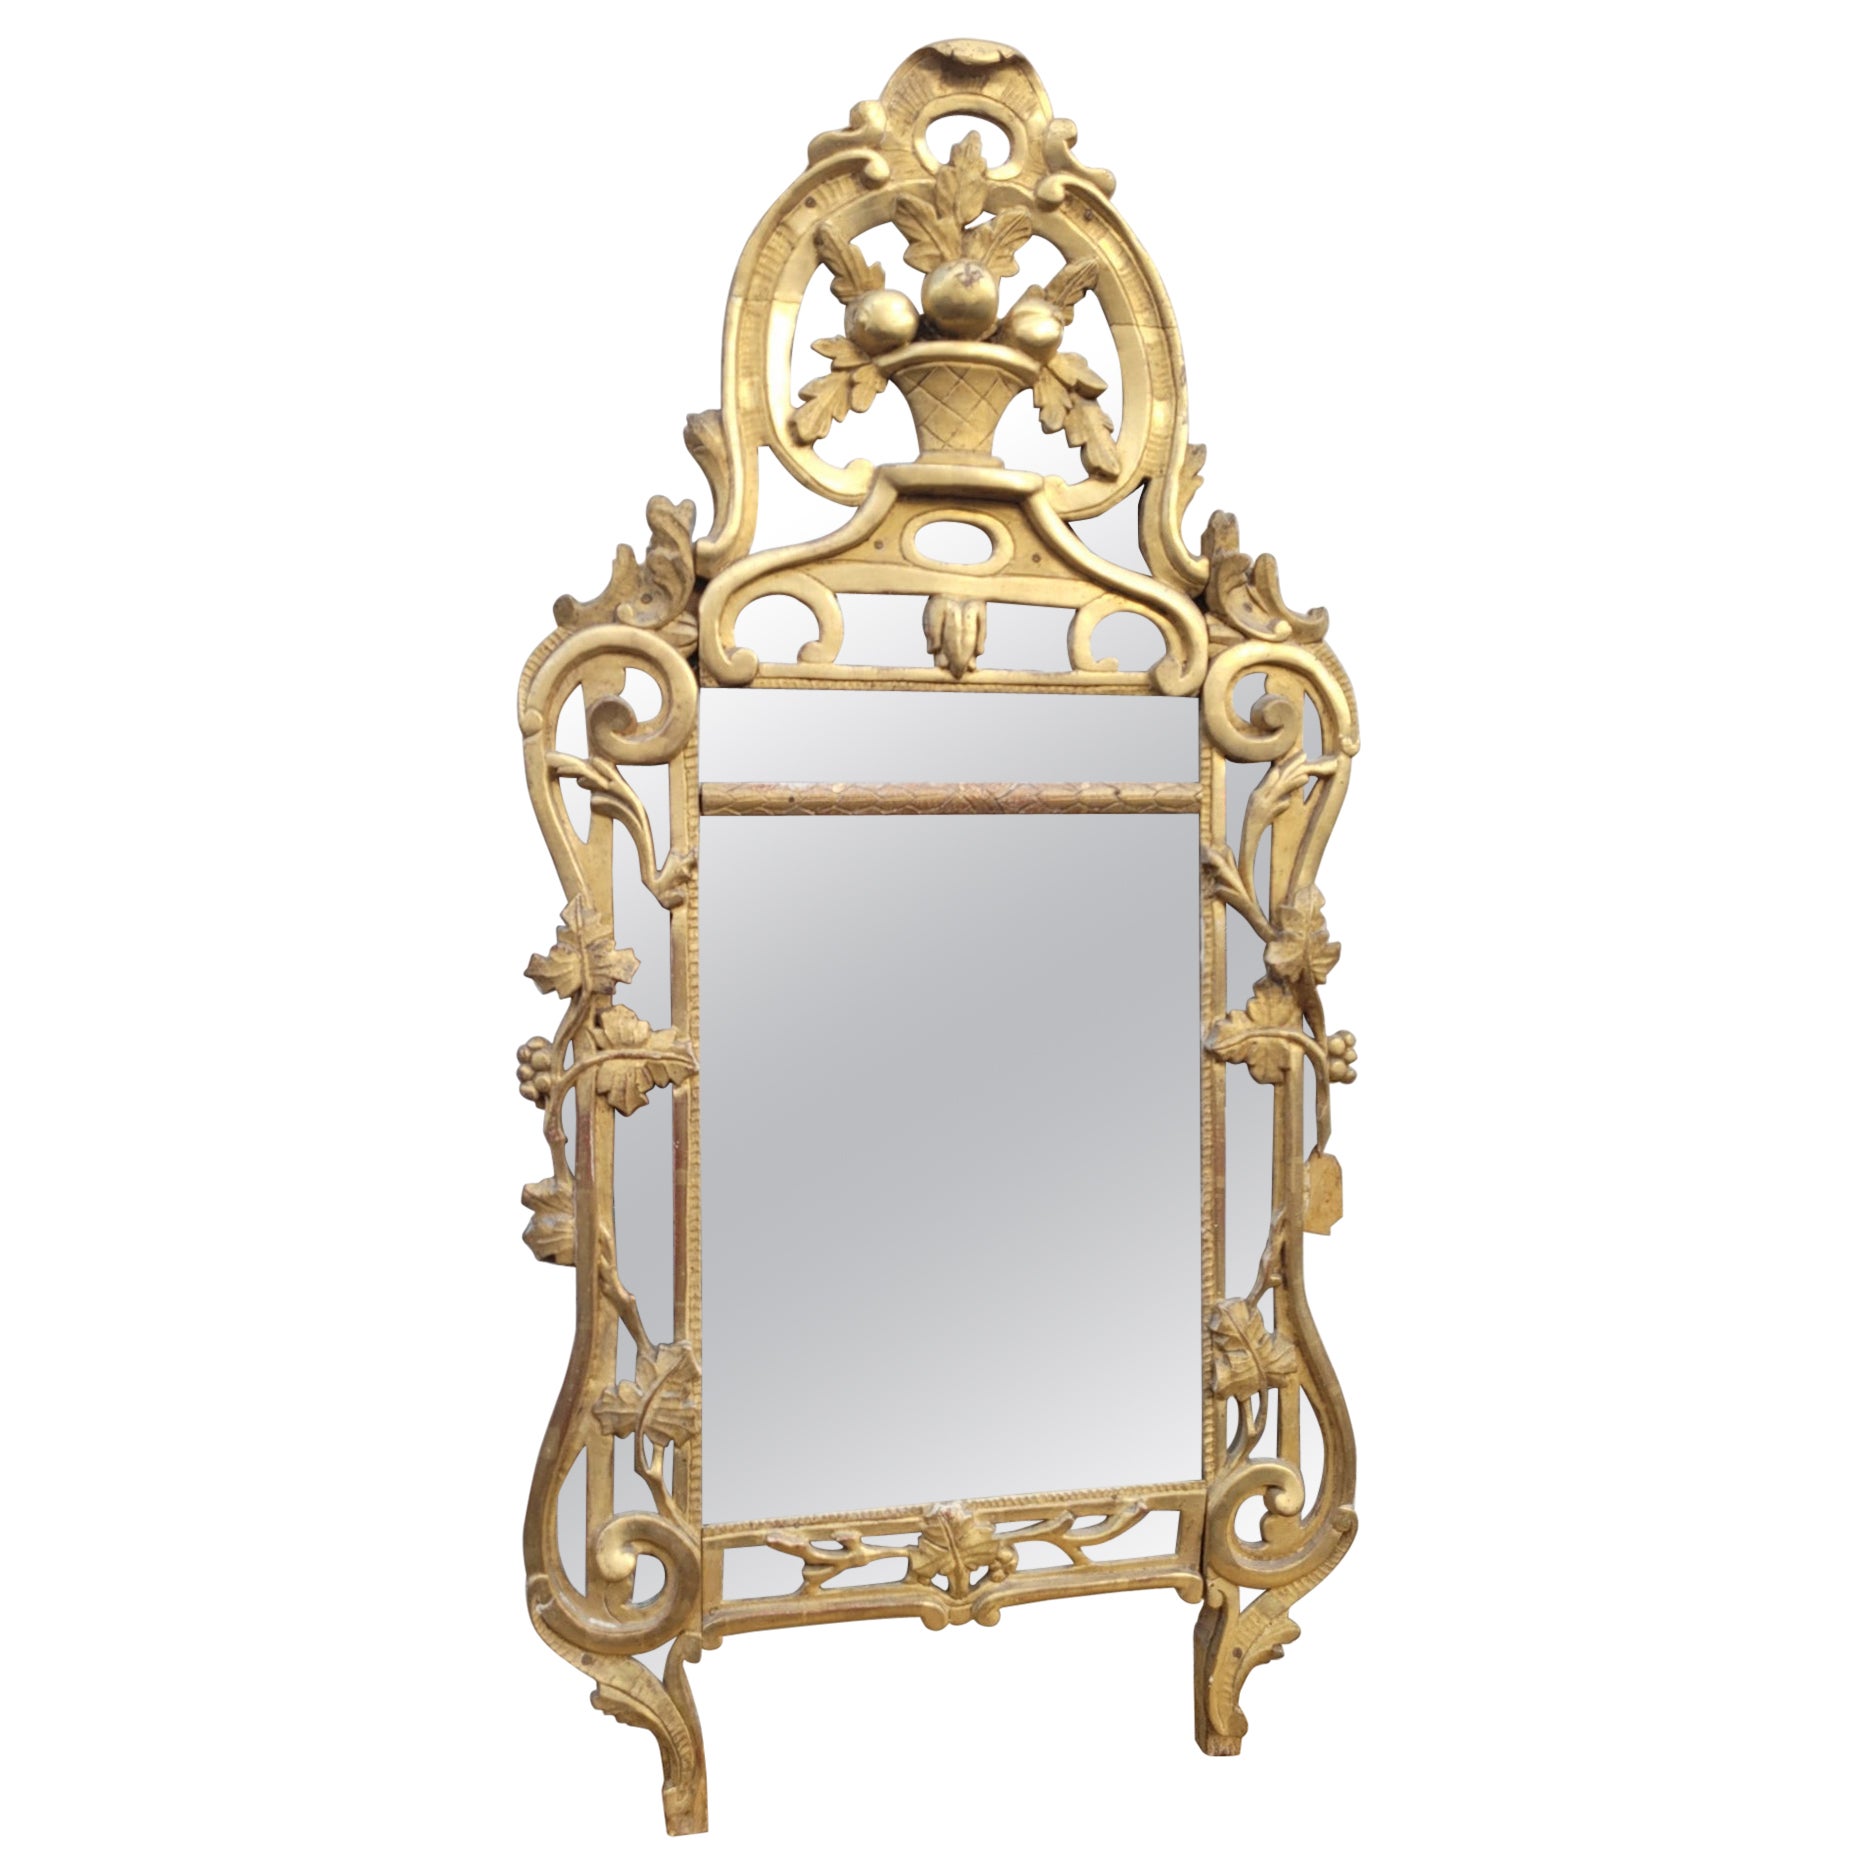 Provençal Mirror In Golden Wood, Beaucaire, Late 18th Century For Sale